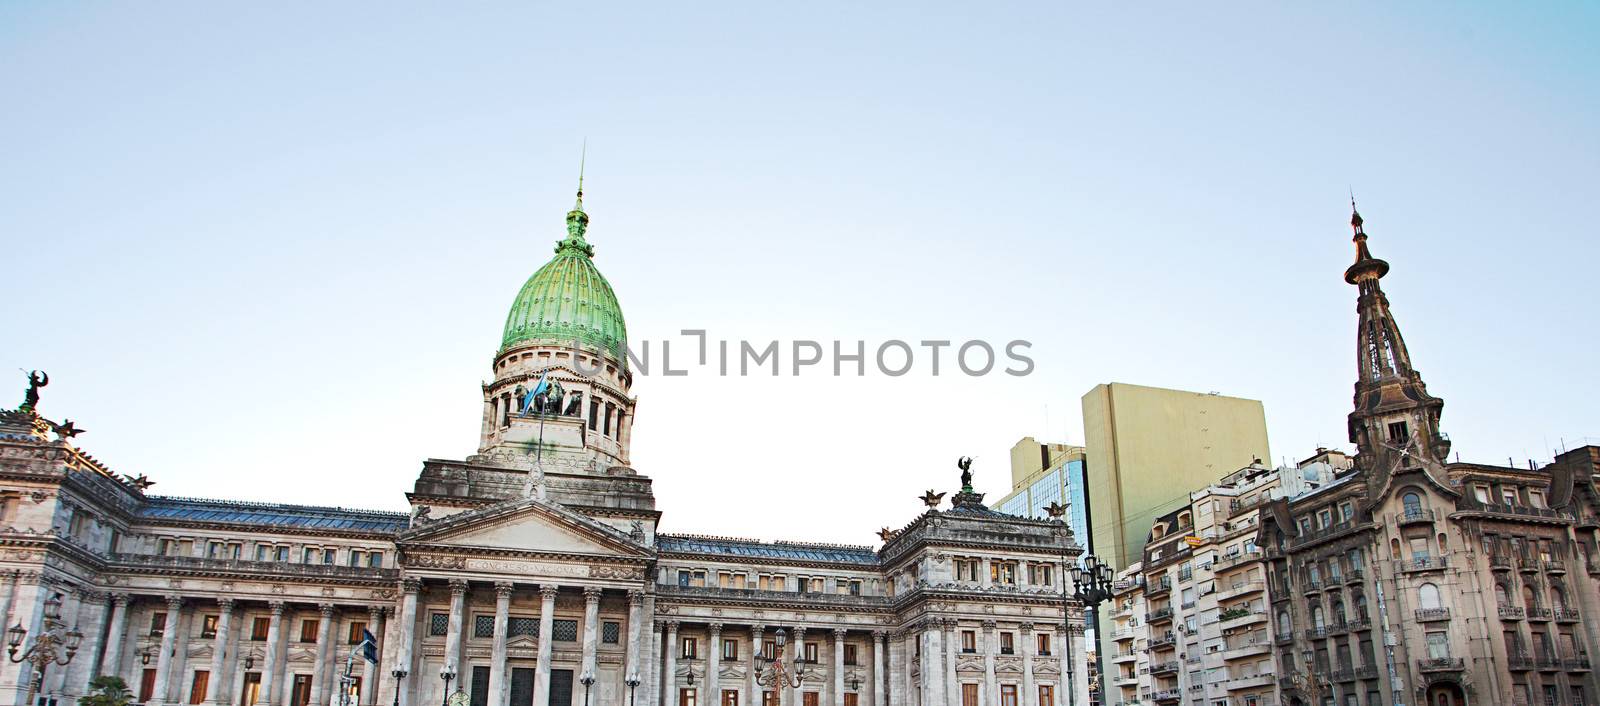 Building of Congress in Buenos Aires, Argentina by jannyjus